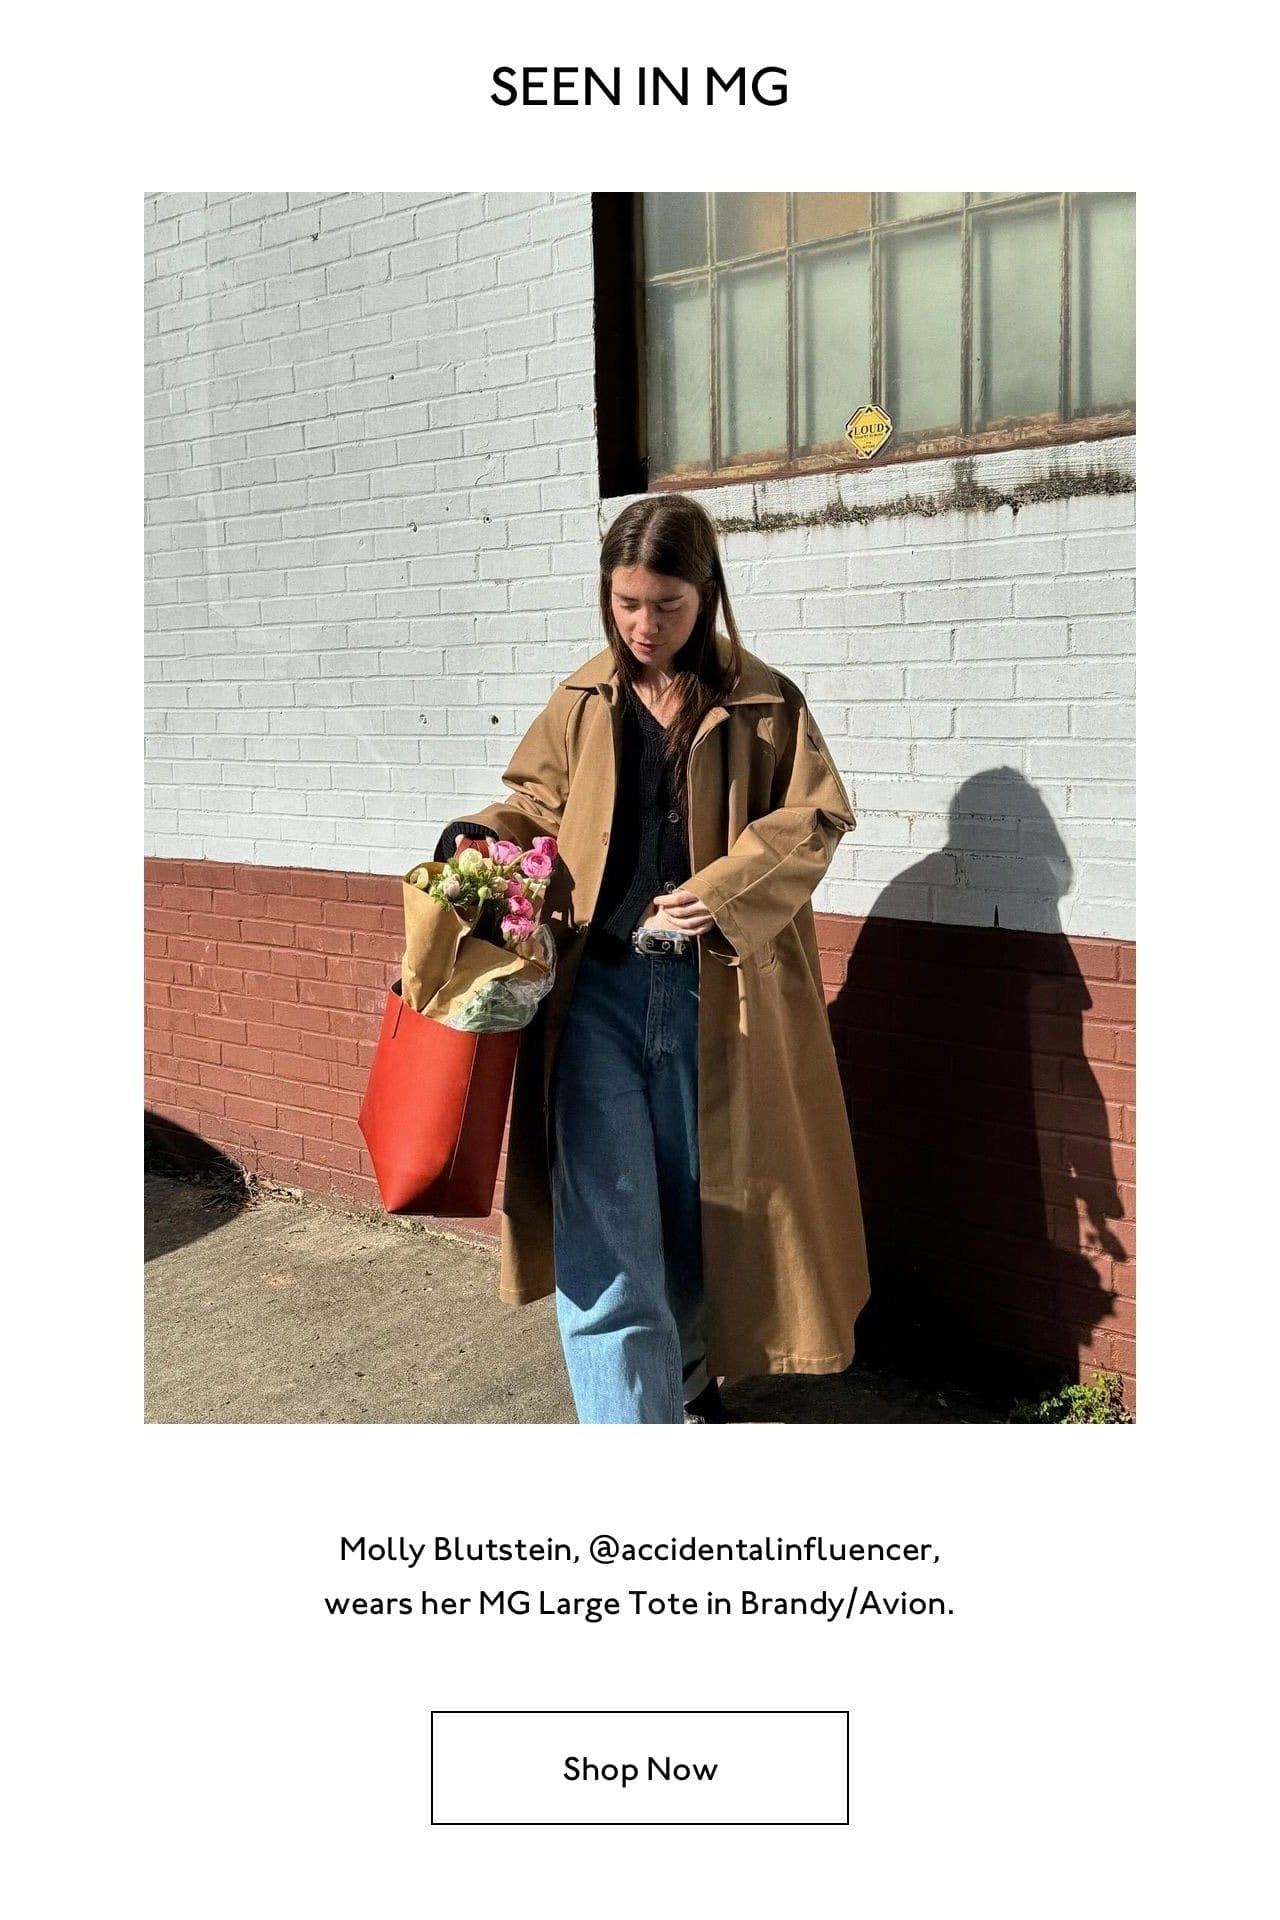 Seen in MG: Molly Blutstein, @accidentalinfluencer, wears her MG Large Tote in Brandy/Avion. Shop now.